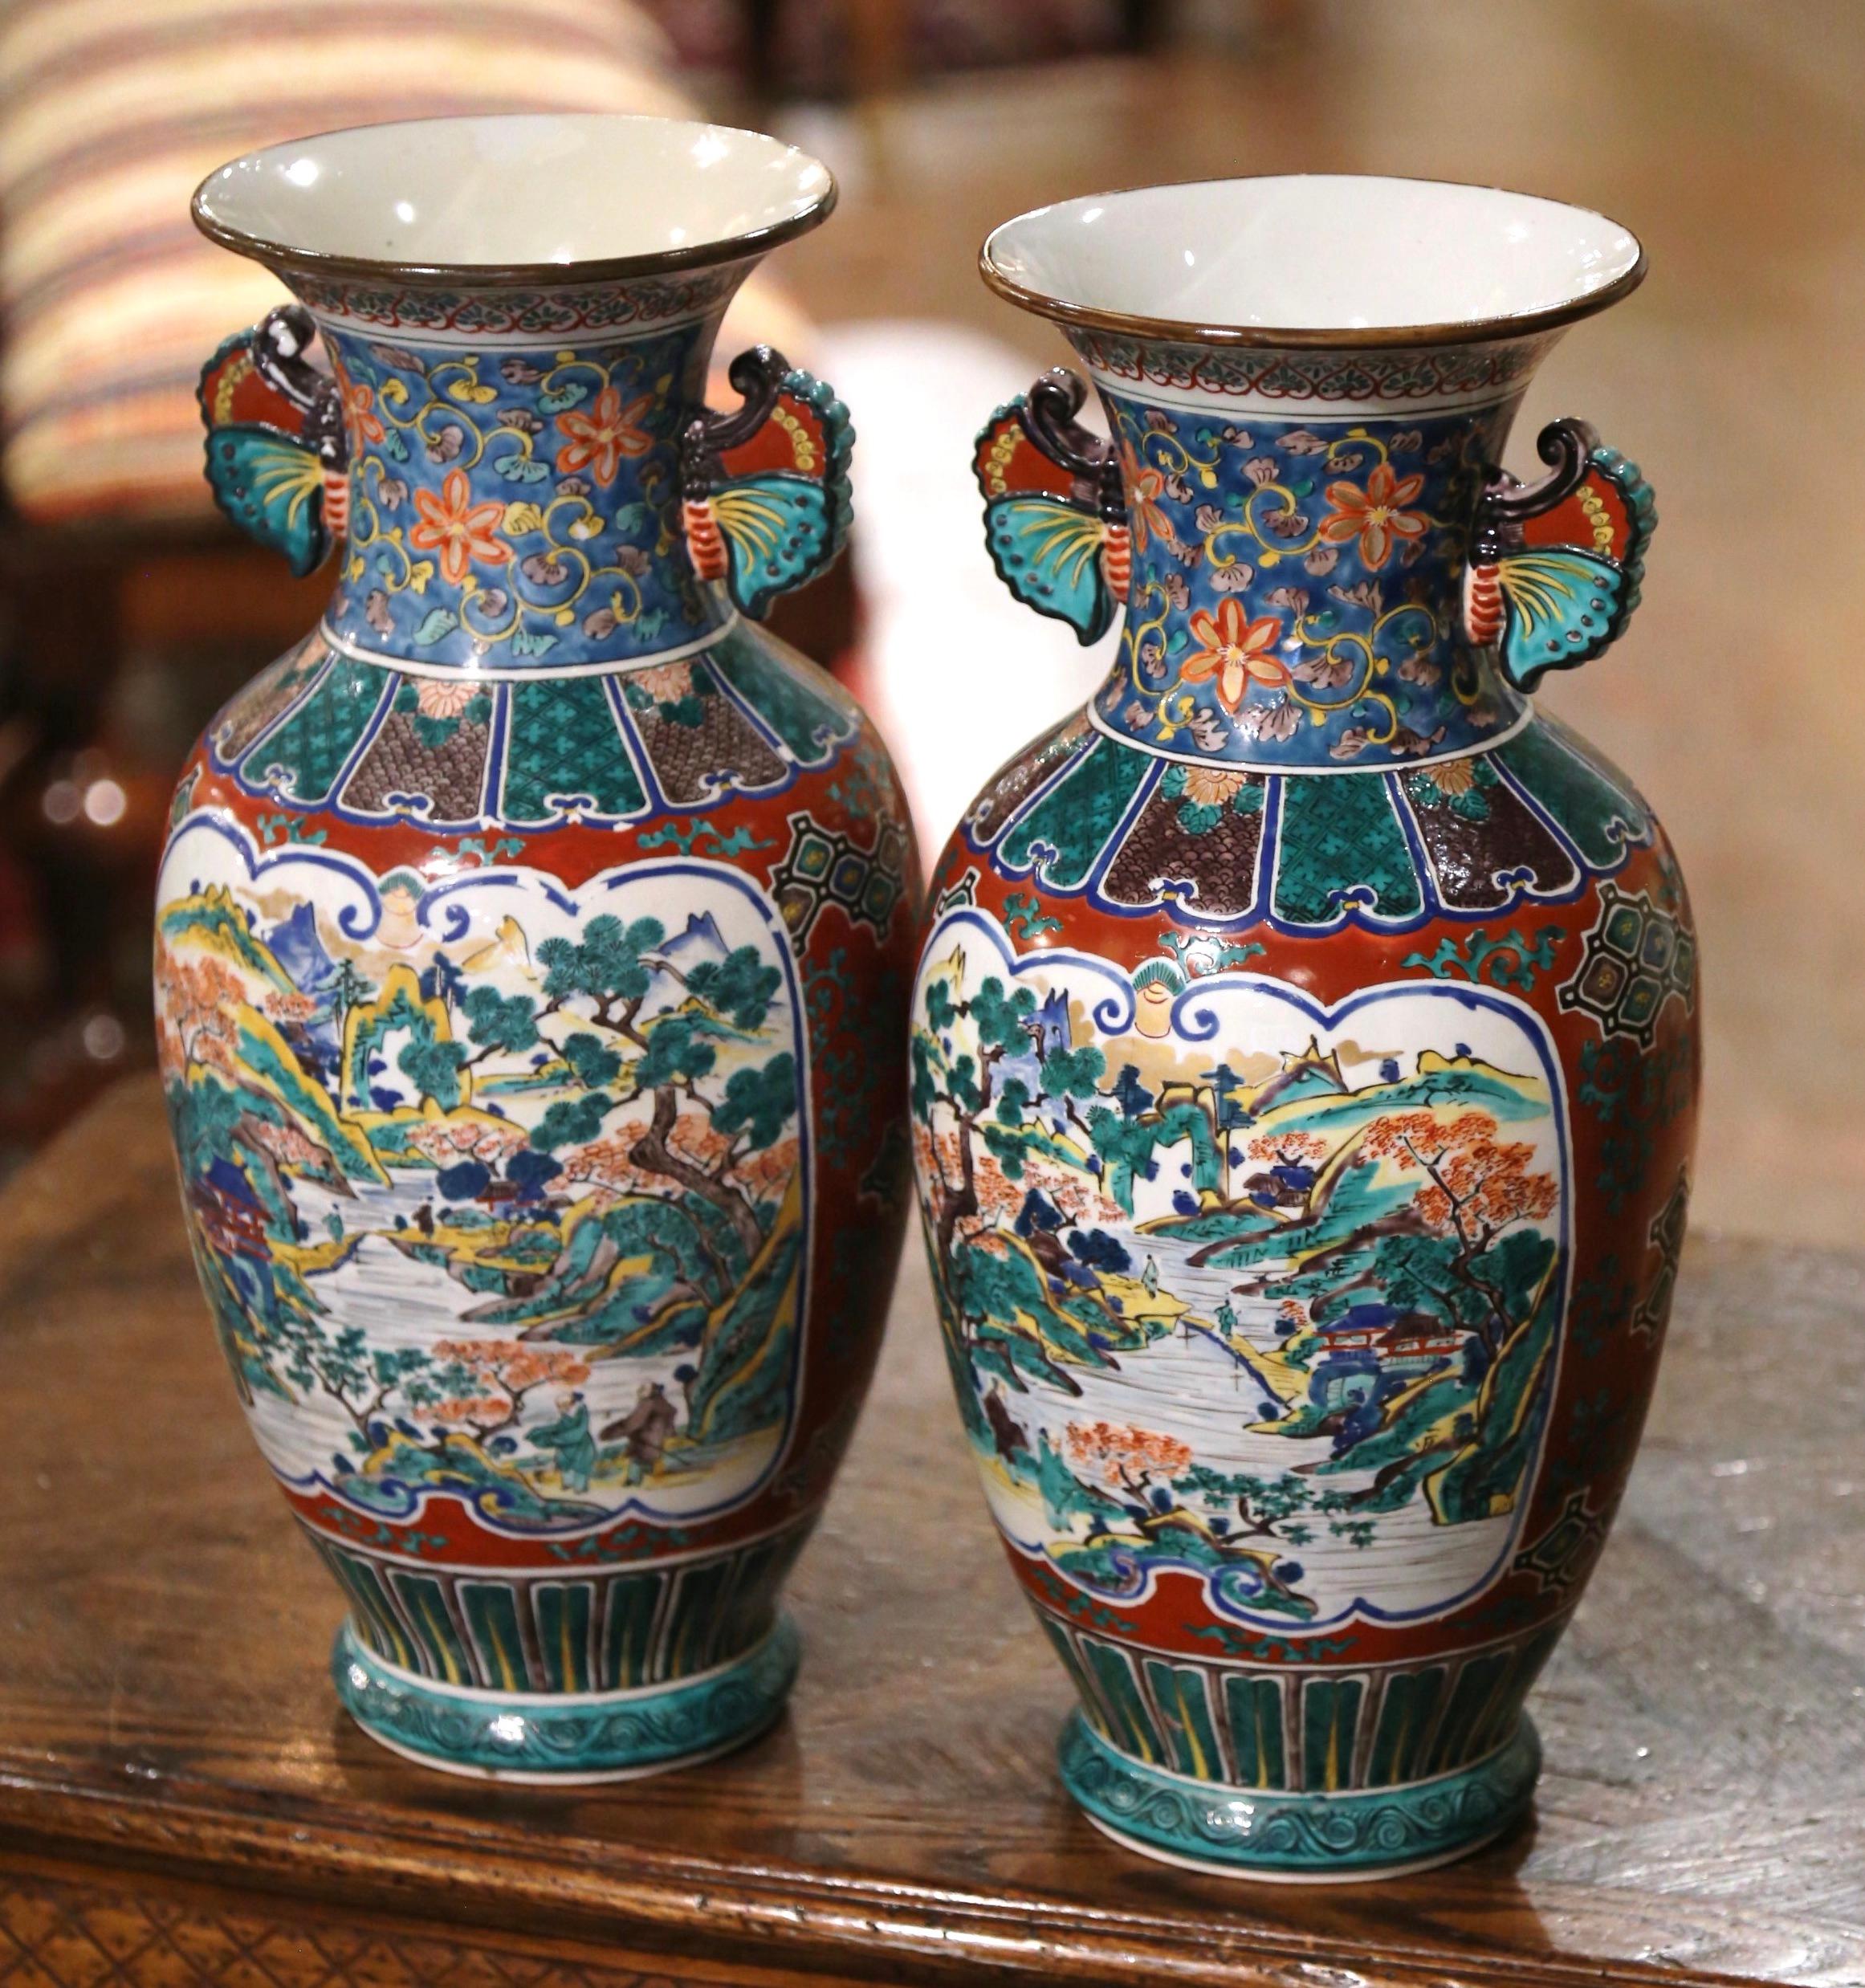 These elegant vases were created in China circa 1950. The large vessels made of porcelain, feature a tall and wide neck embellished by butterfly form handles on either side. Each vase is decorated with hand painted polychrome enameled flowers,